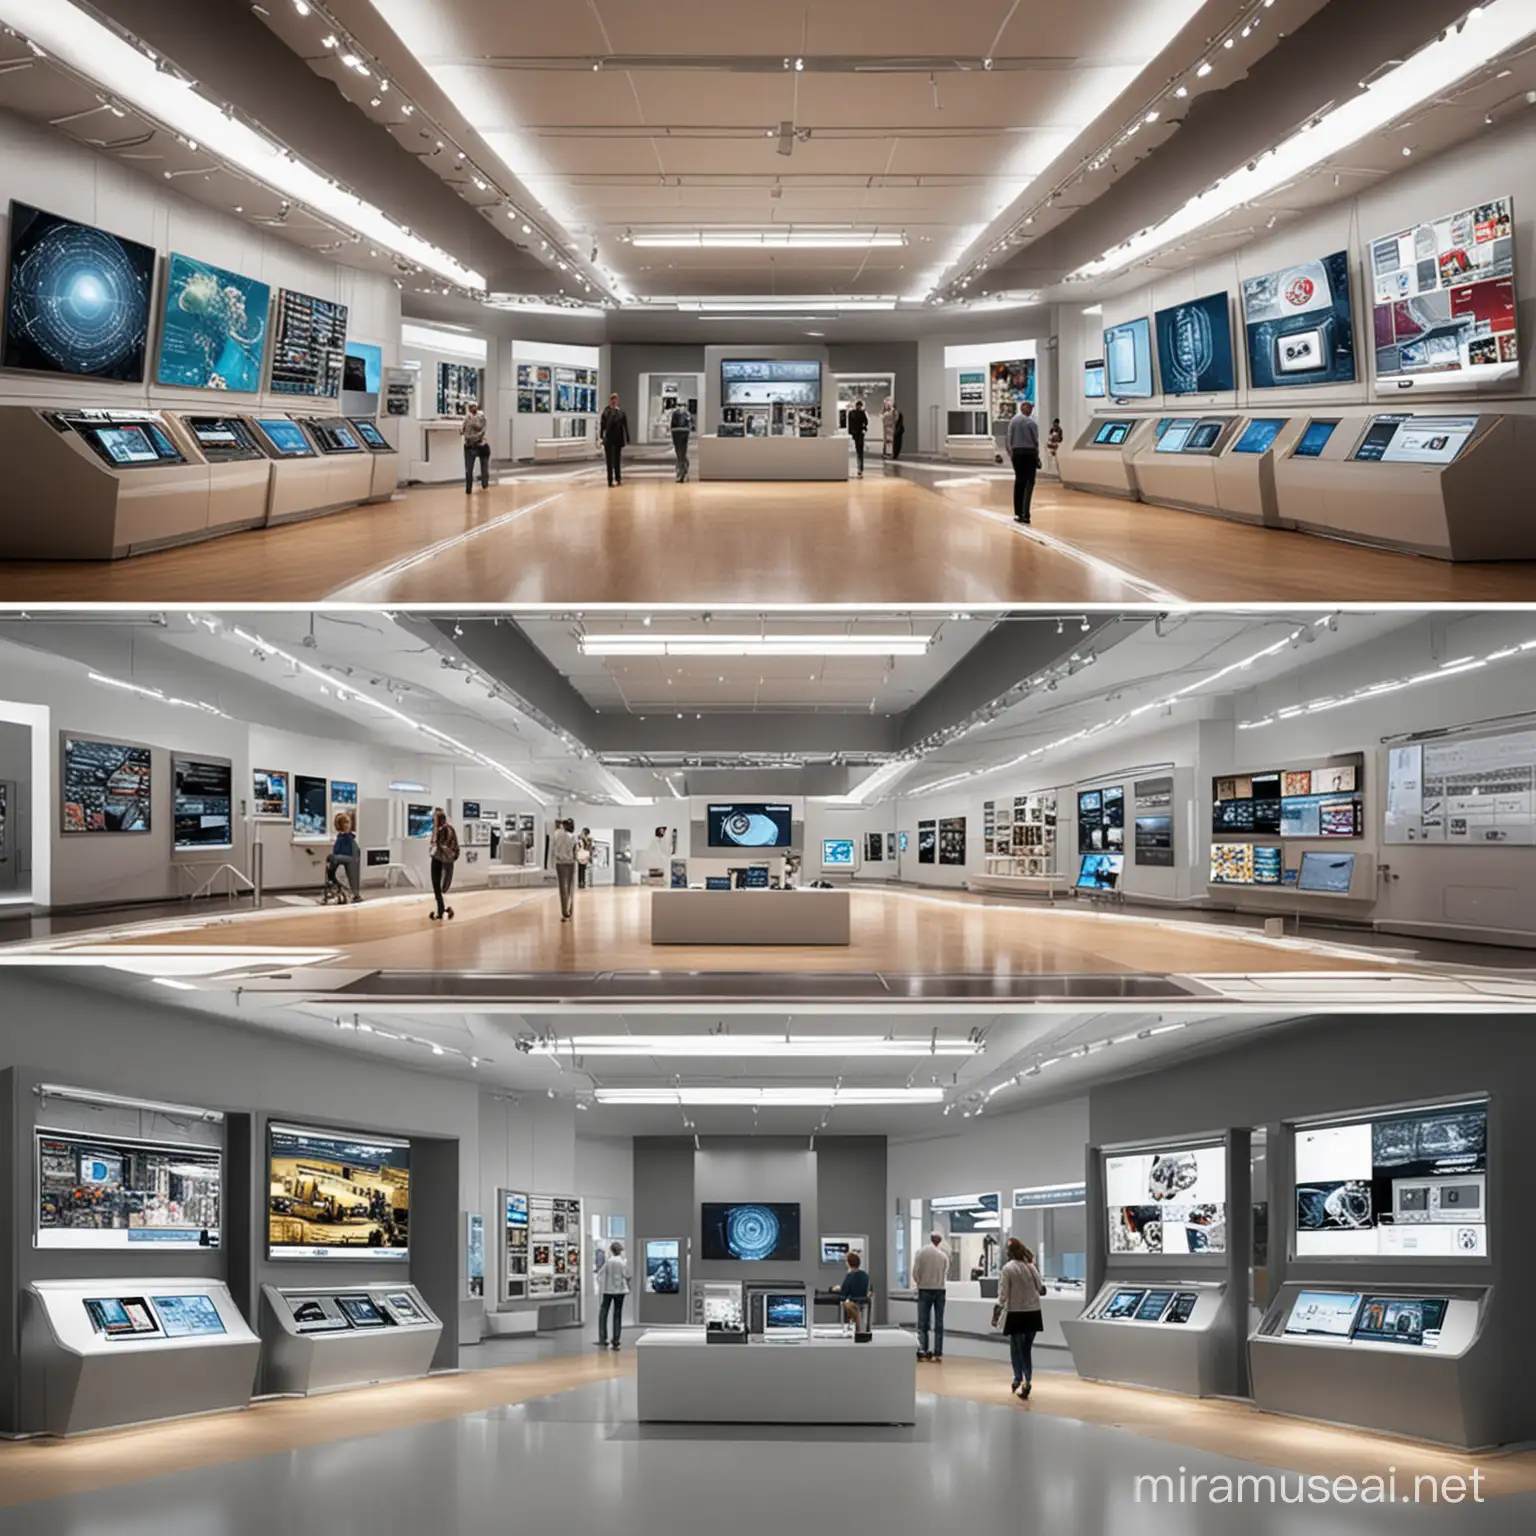 Innovative Technology and Arts Museum Interior with Display Units and Interactive Robots